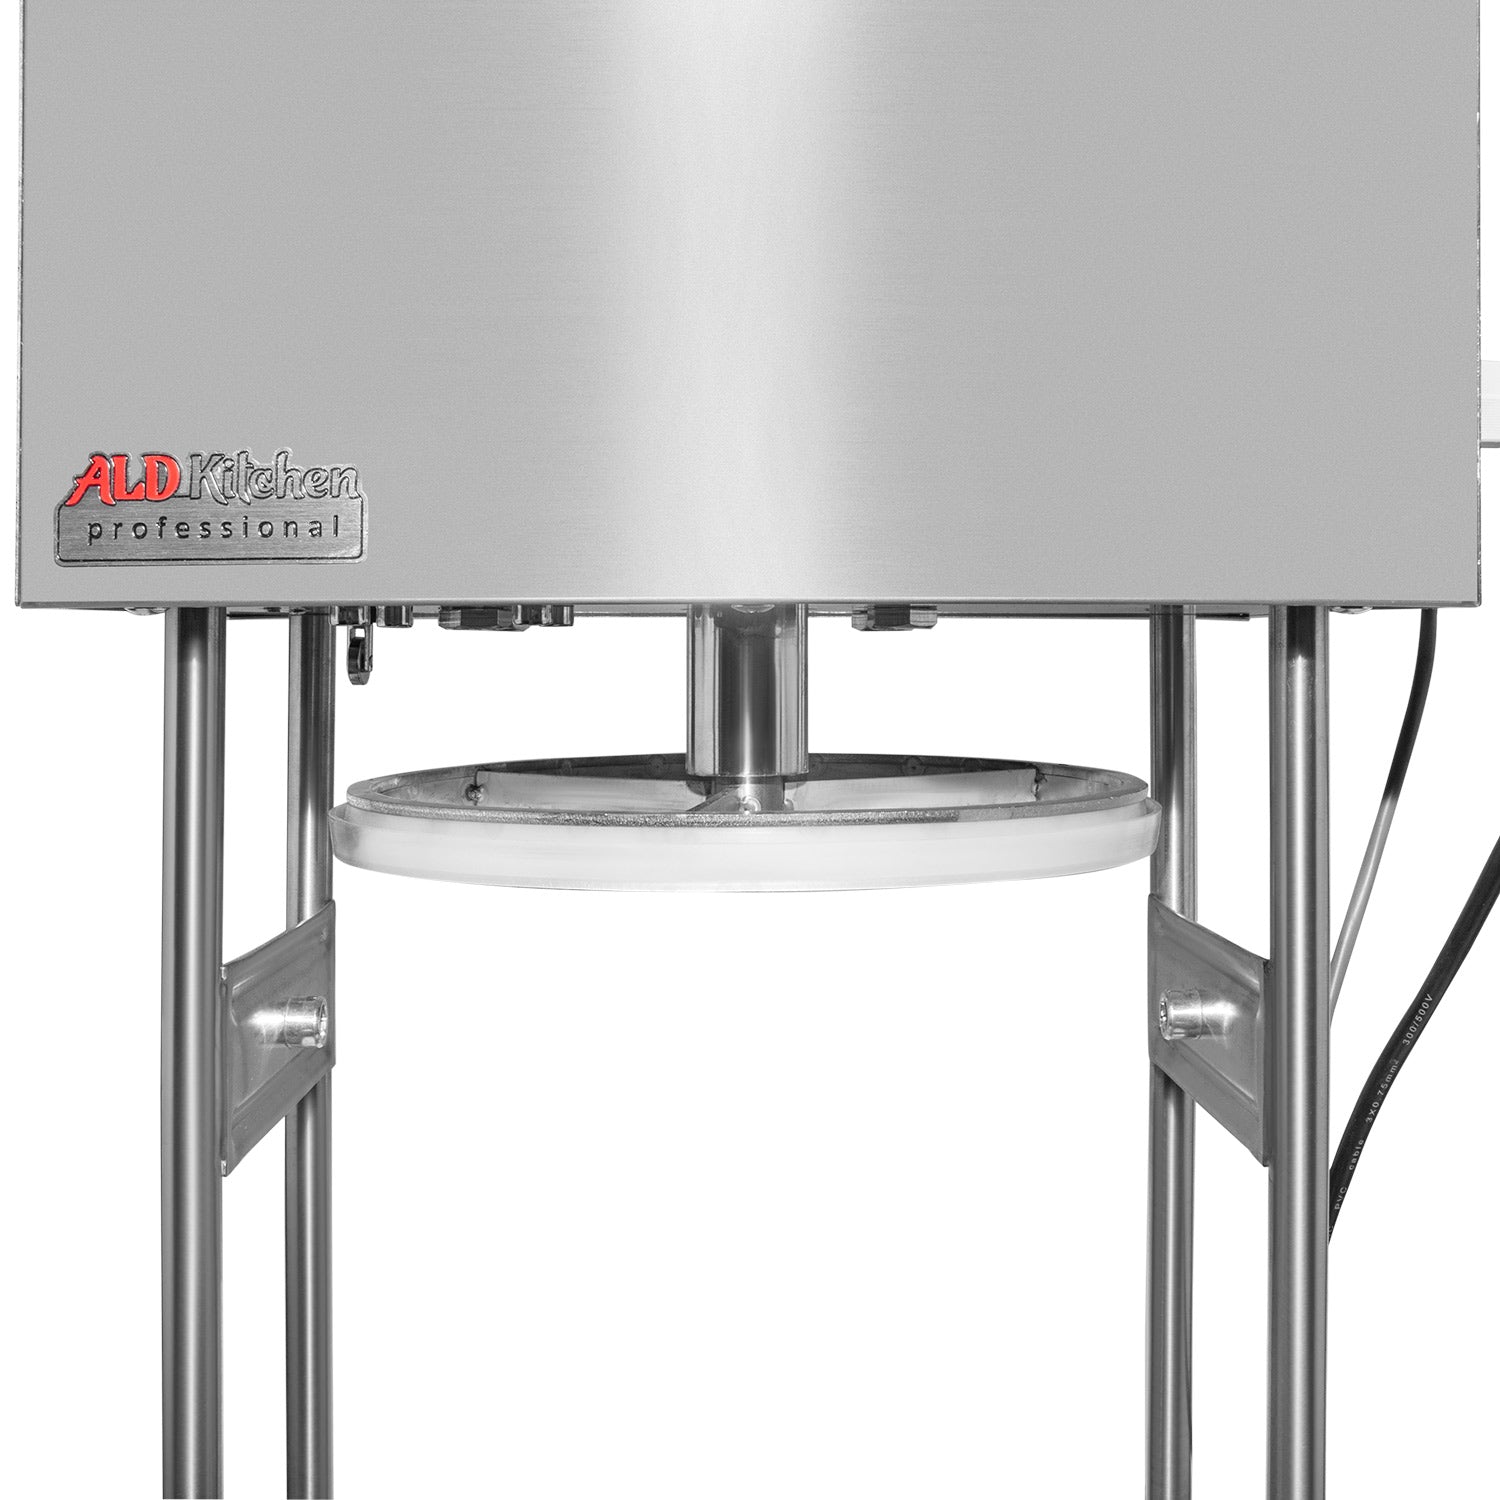 A-FCM15 Churro Maker | Vertical Type Electric Churro Machine | Stainless Steel | 15L | Pedal Control